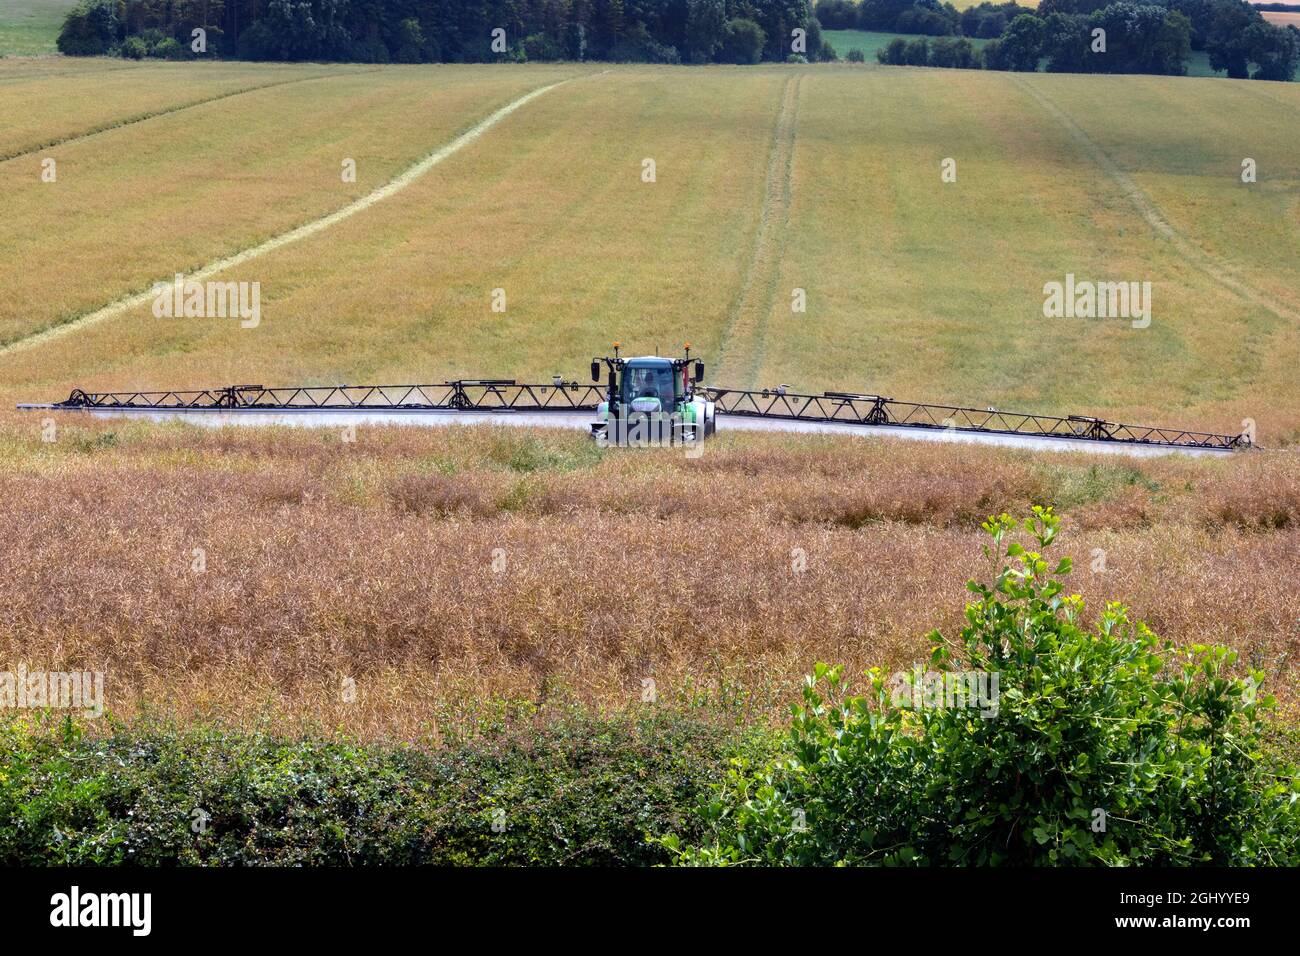 Agriculture - A farmer spraying pesticide on his crops - North Yorkshire - England. Stock Photo